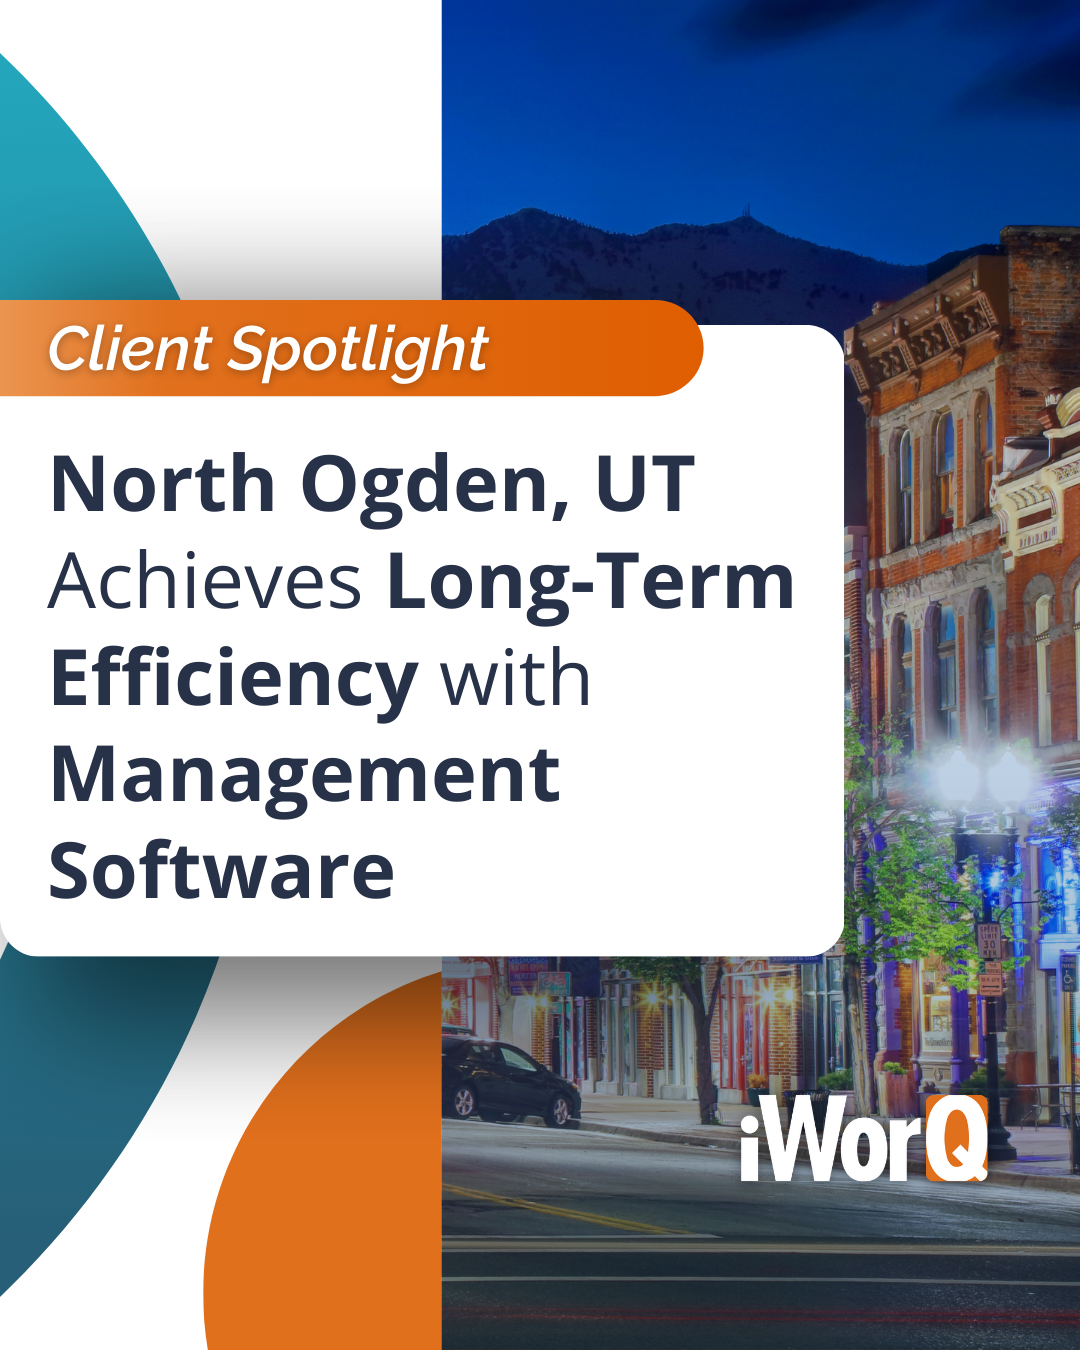 North Ogden, UT Achieves Long-Term Efficiency with Management Software